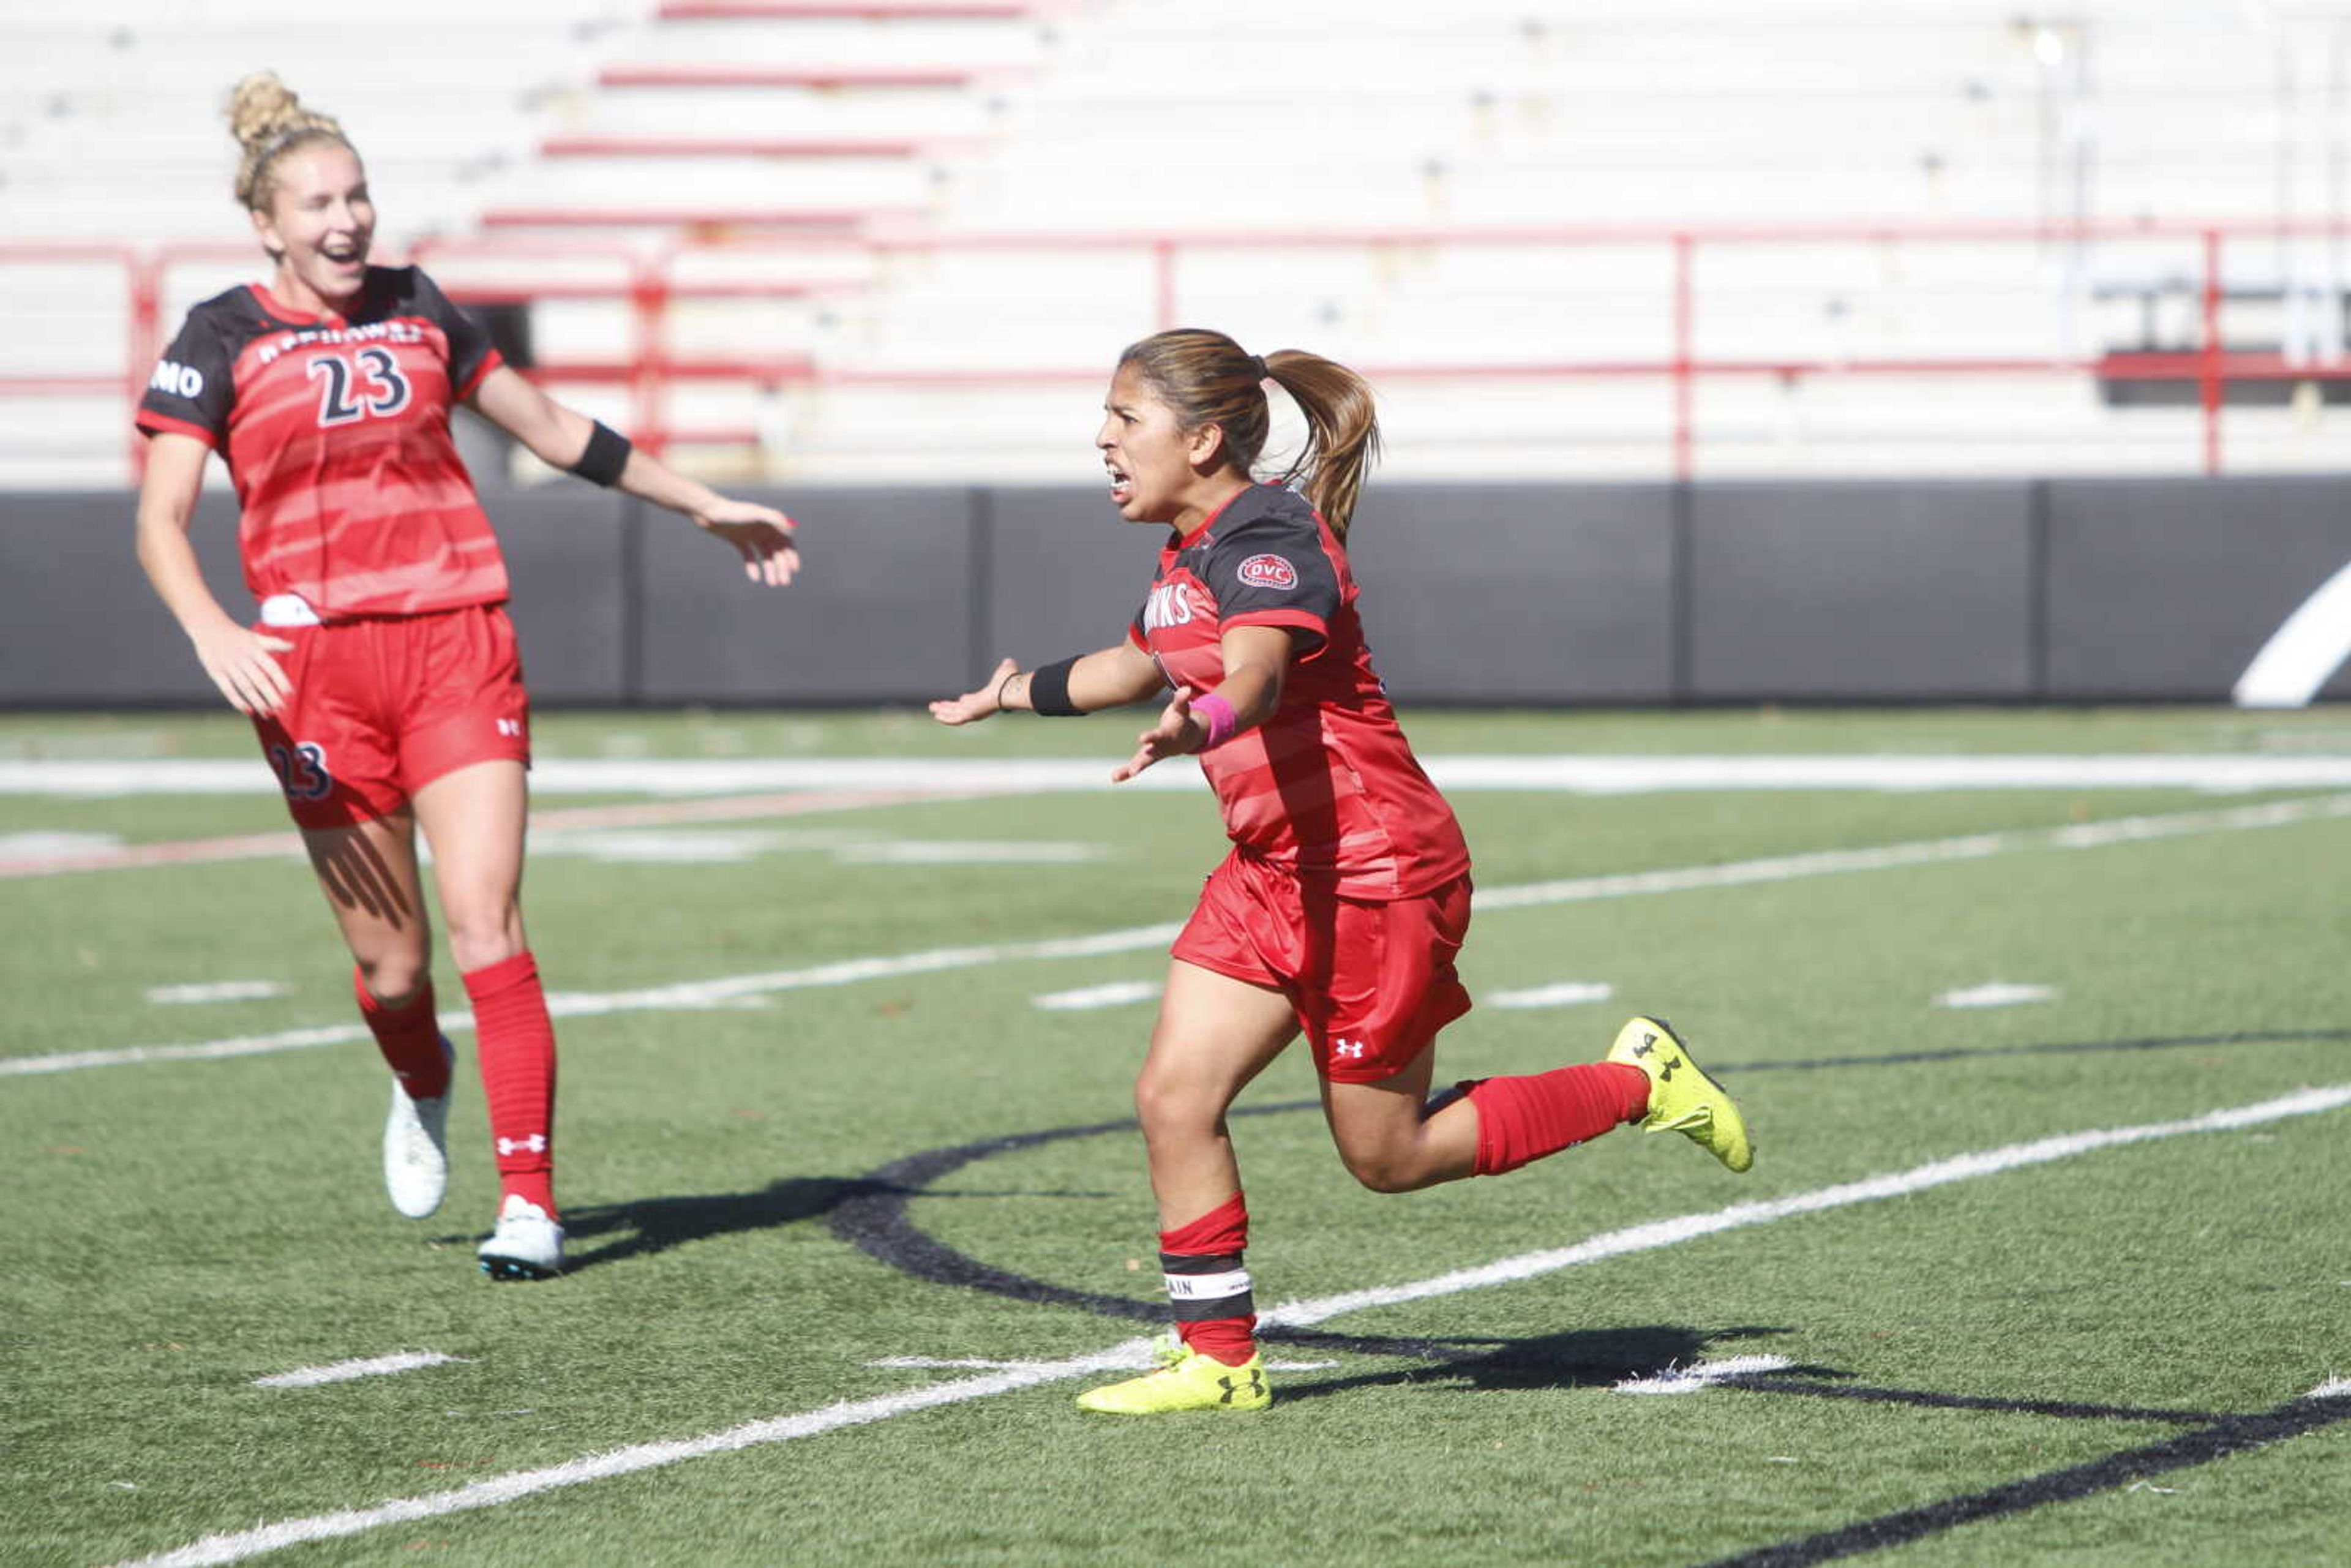 Junior midfielder Esmie Gonzales celebrates after scoring her eighth goal of the season in first half against Austin Peay on Oct. 21.